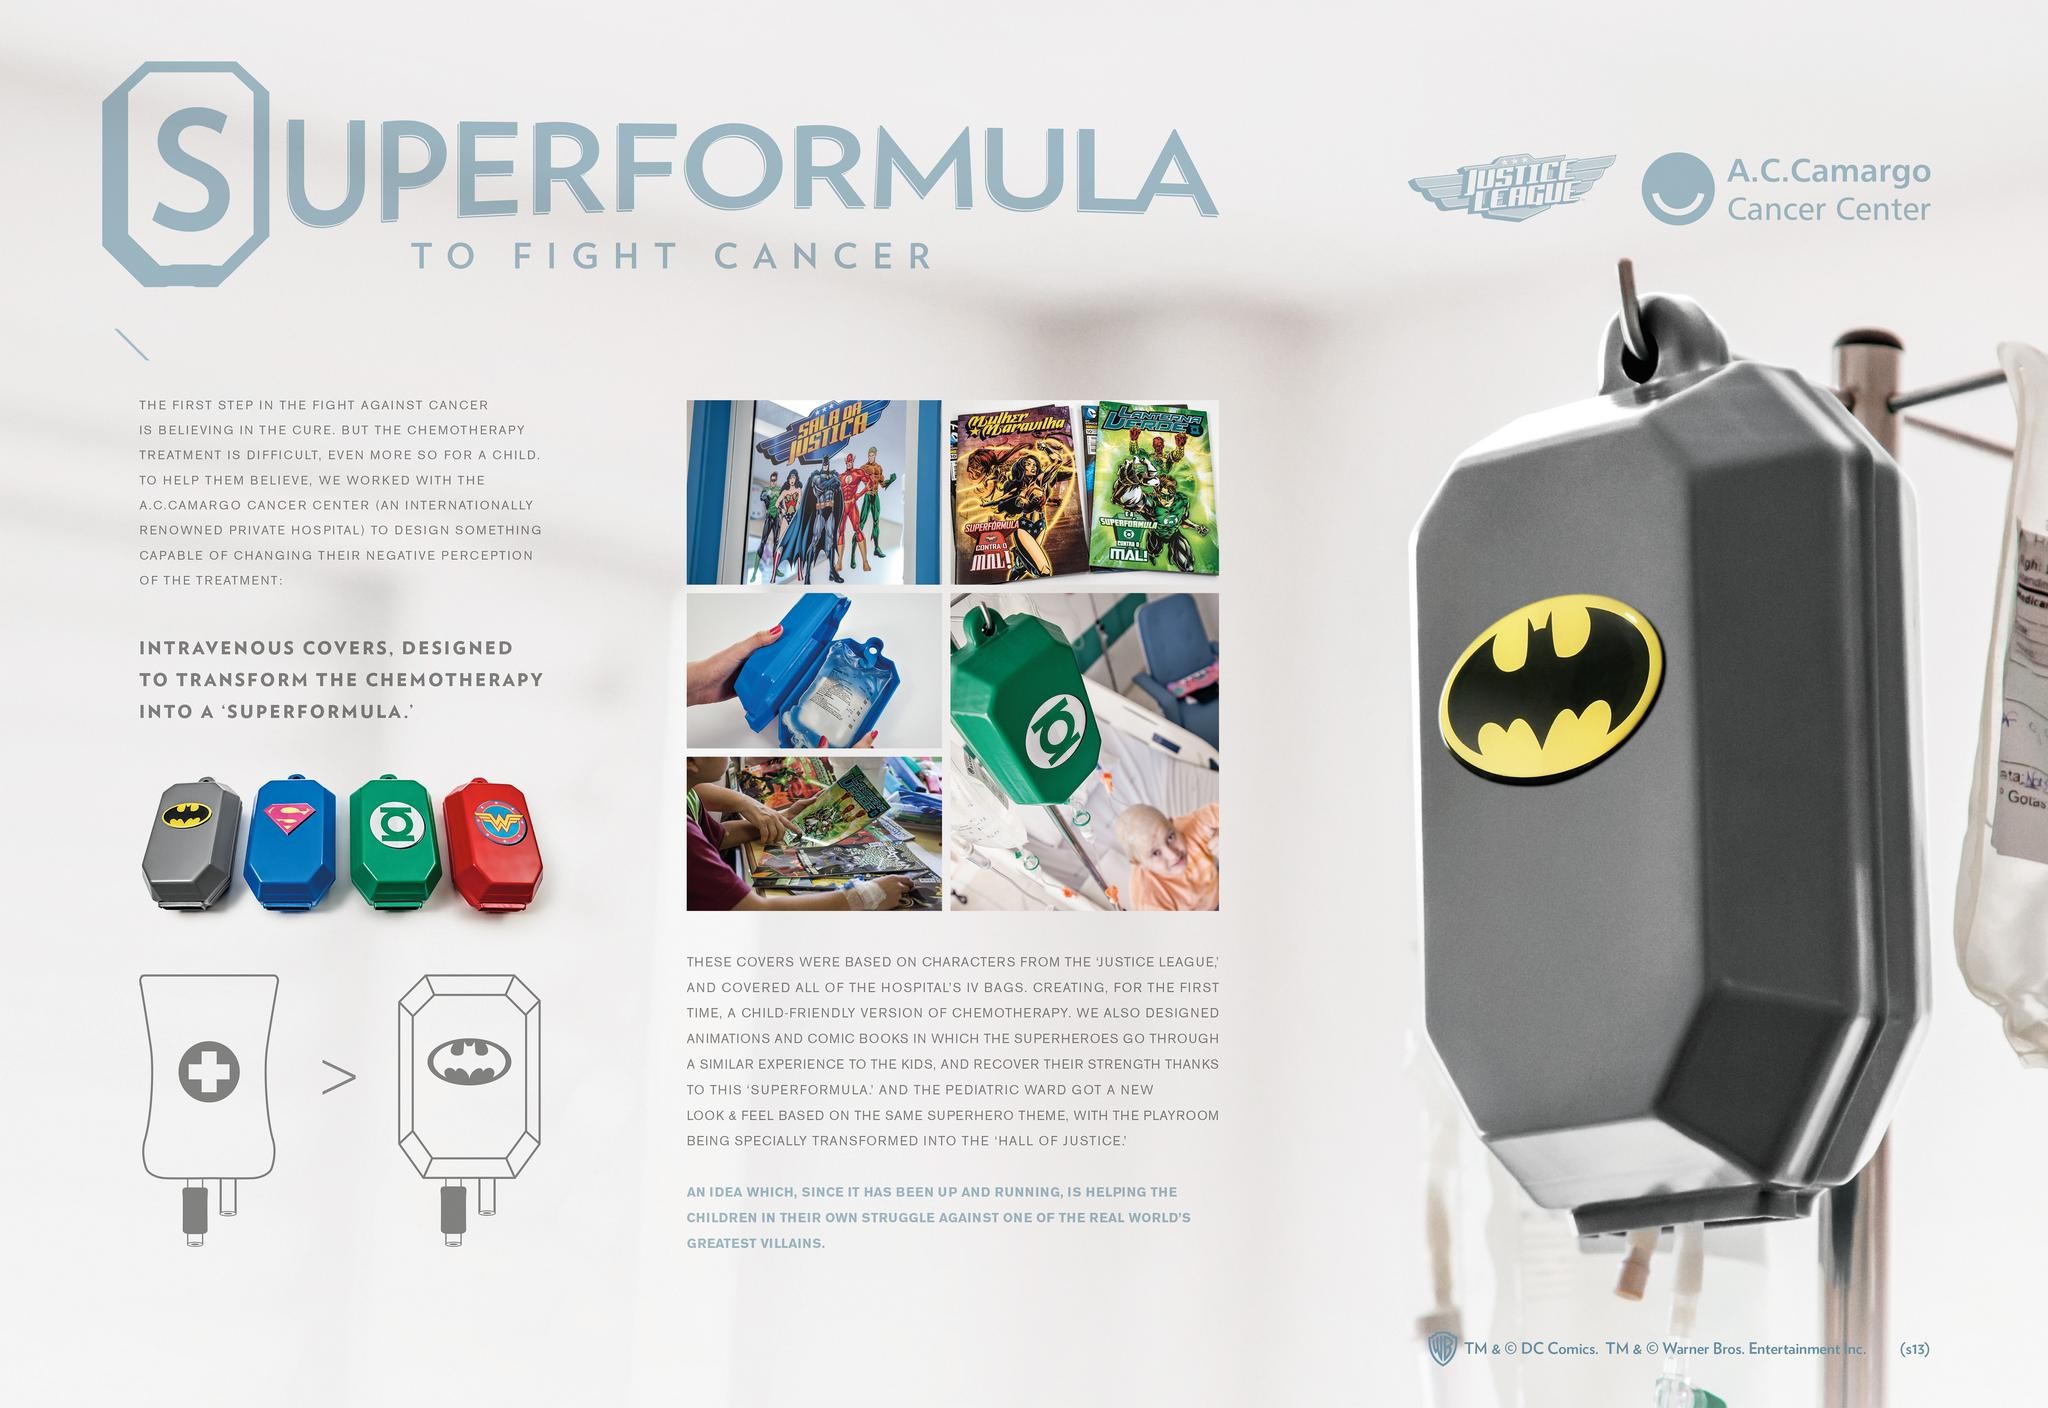 SUPERFORMULA TO FIGHT CANCER